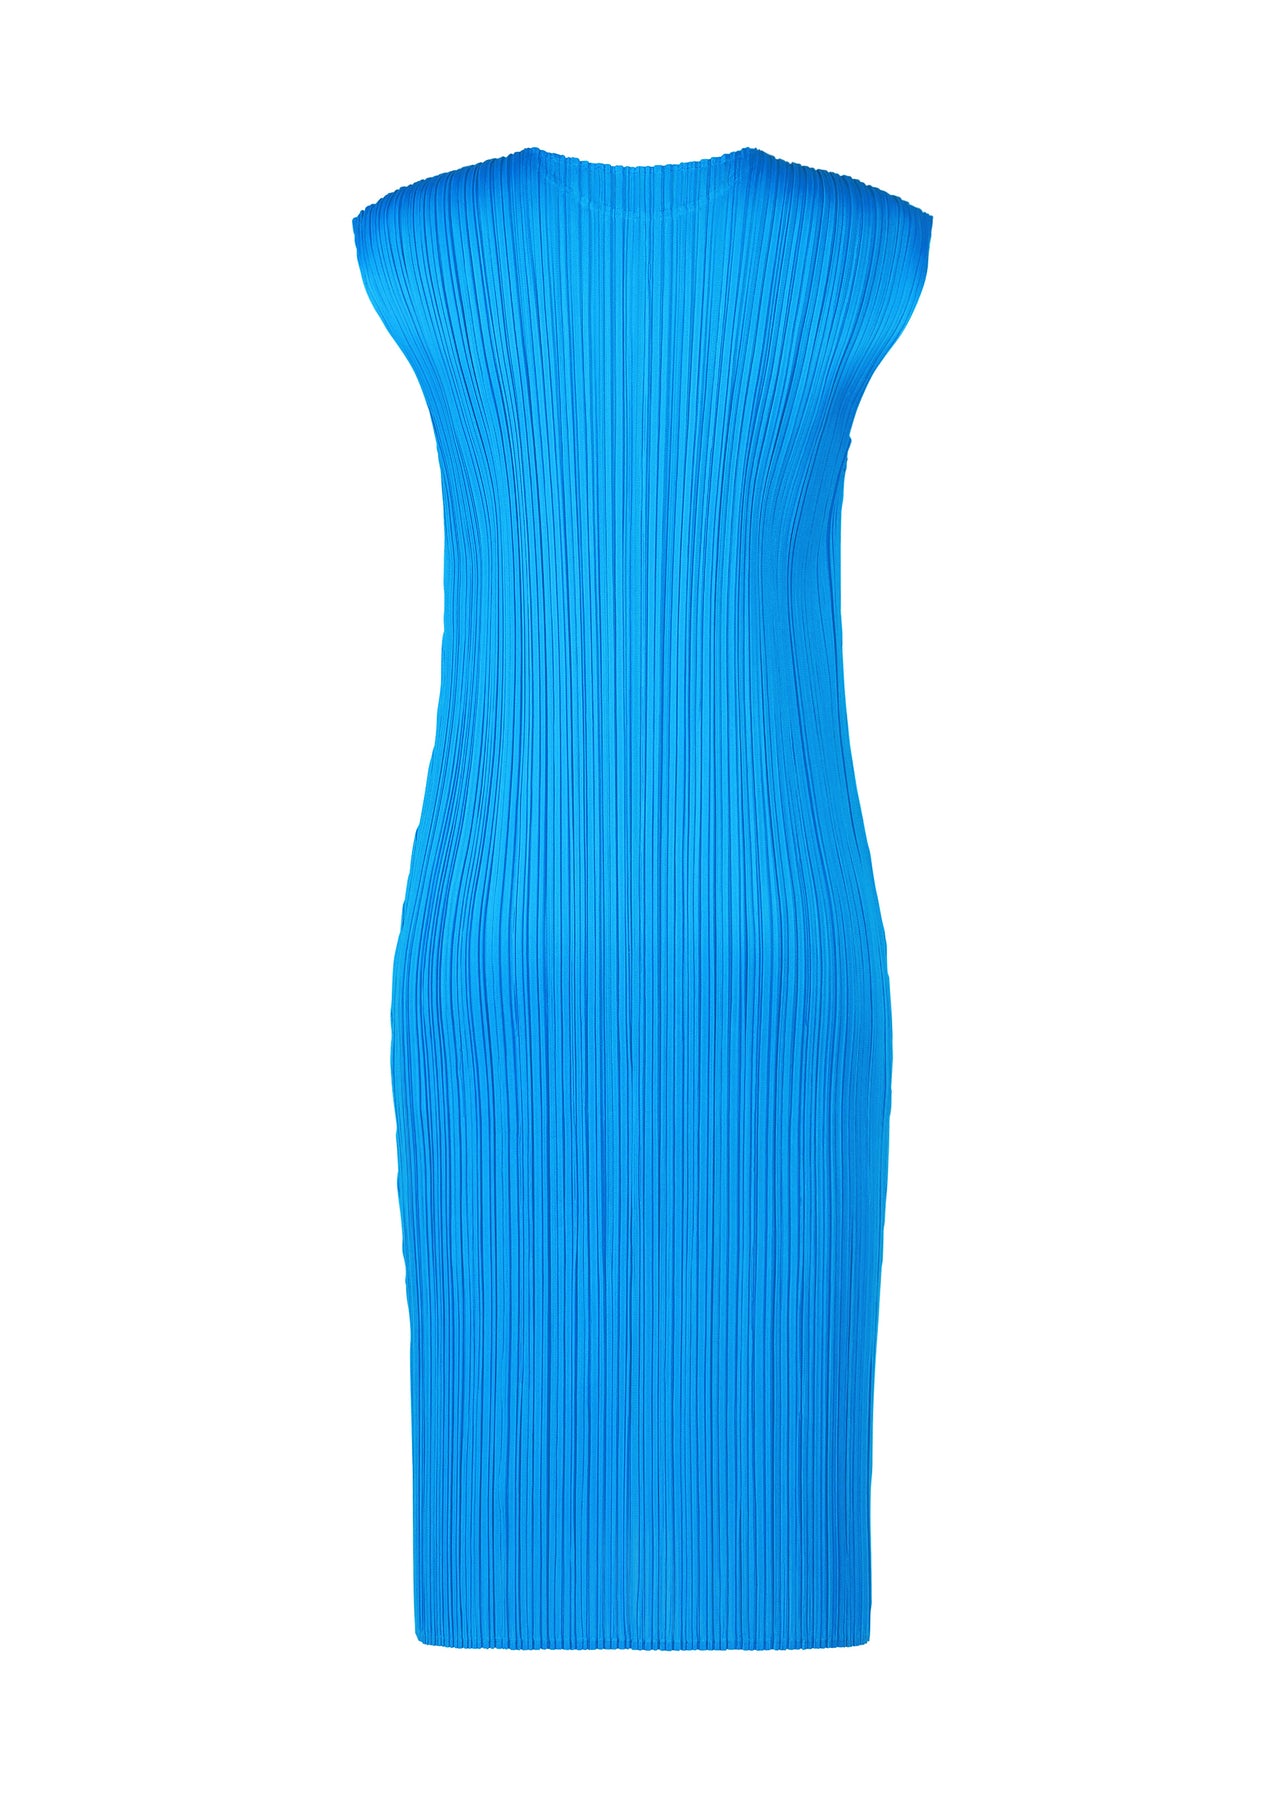 MONTHLY COLORS : AUGUST DRESS | The official ISSEY MIYAKE ONLINE